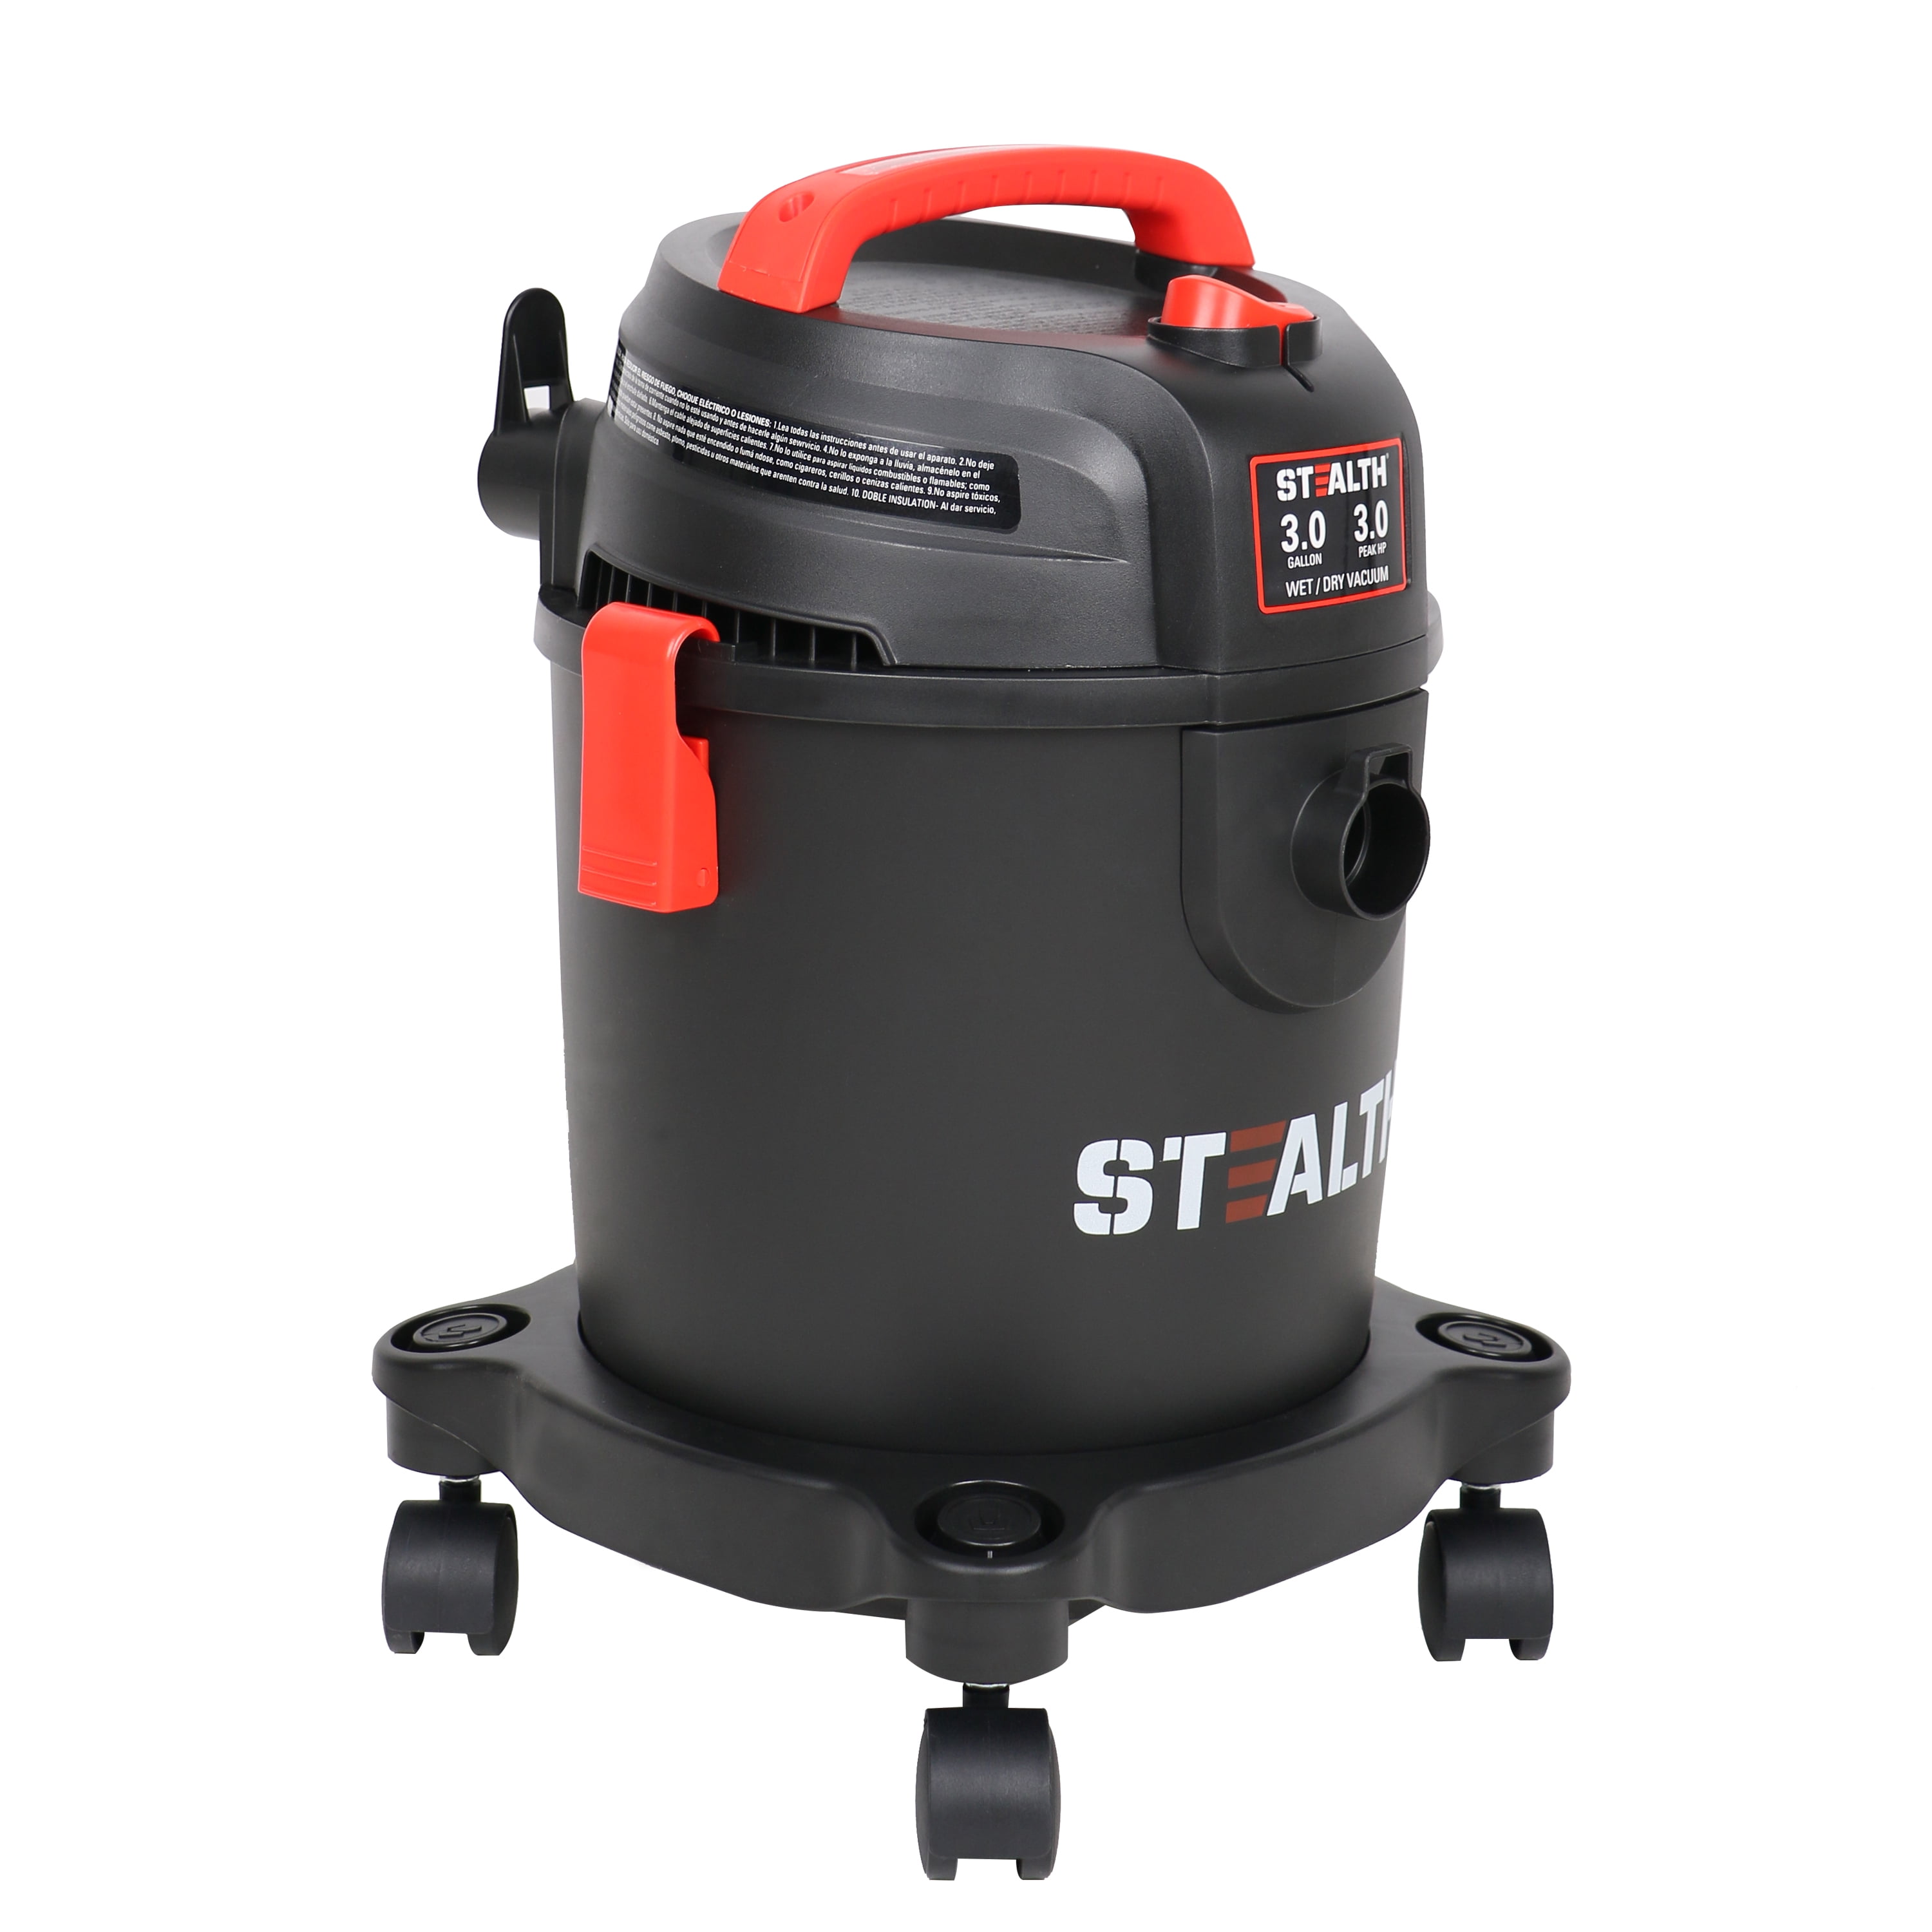 geest Maan Gom STEALTH 3 Gallon 3 Peak Horsepower Wet Dry Vacuum (AT18202P-3B) with  swiveling casters - Walmart.com